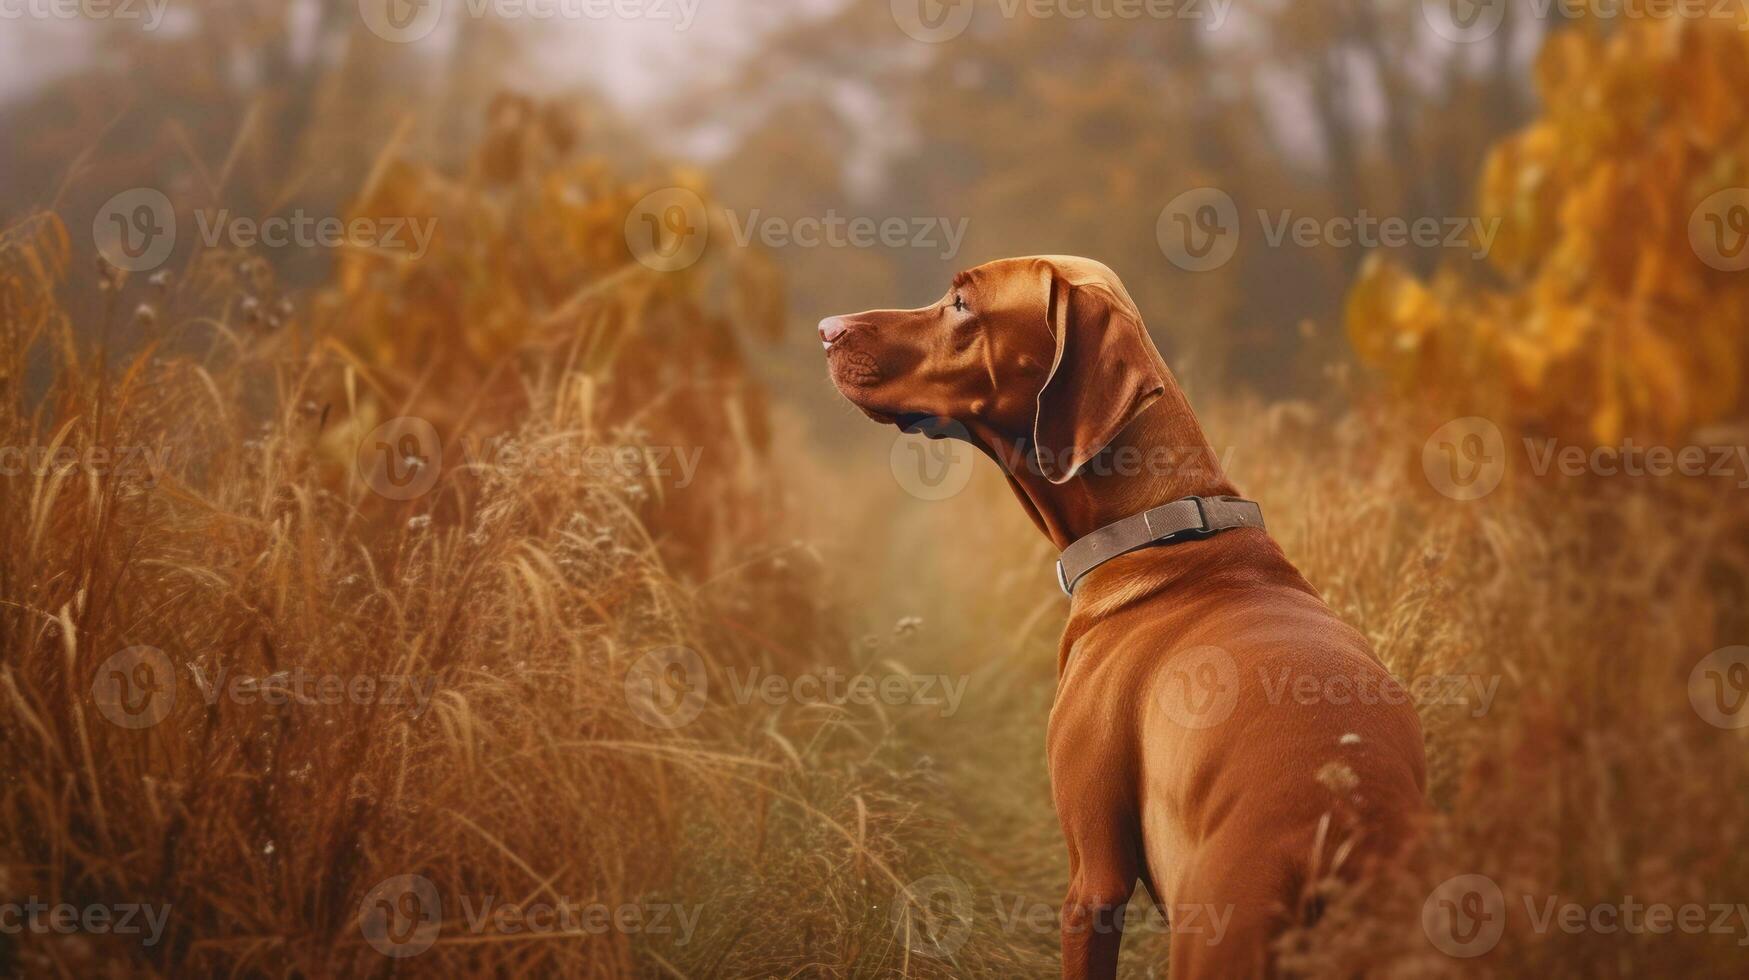 Hungarian hound pointer Vizsla dog in the field during autumn time, its russet-gold coat blending seamlessly with the fall leaves around it photo